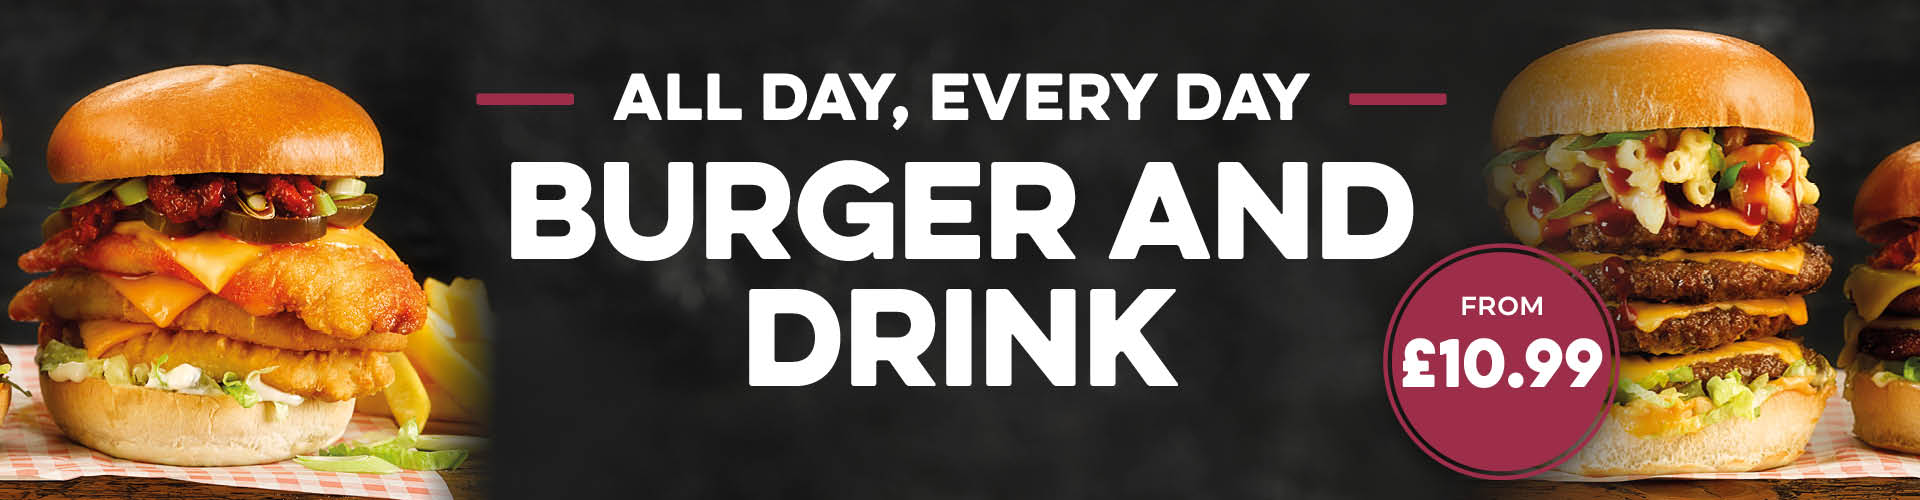 Enjoy a burger and a drink for £10.99